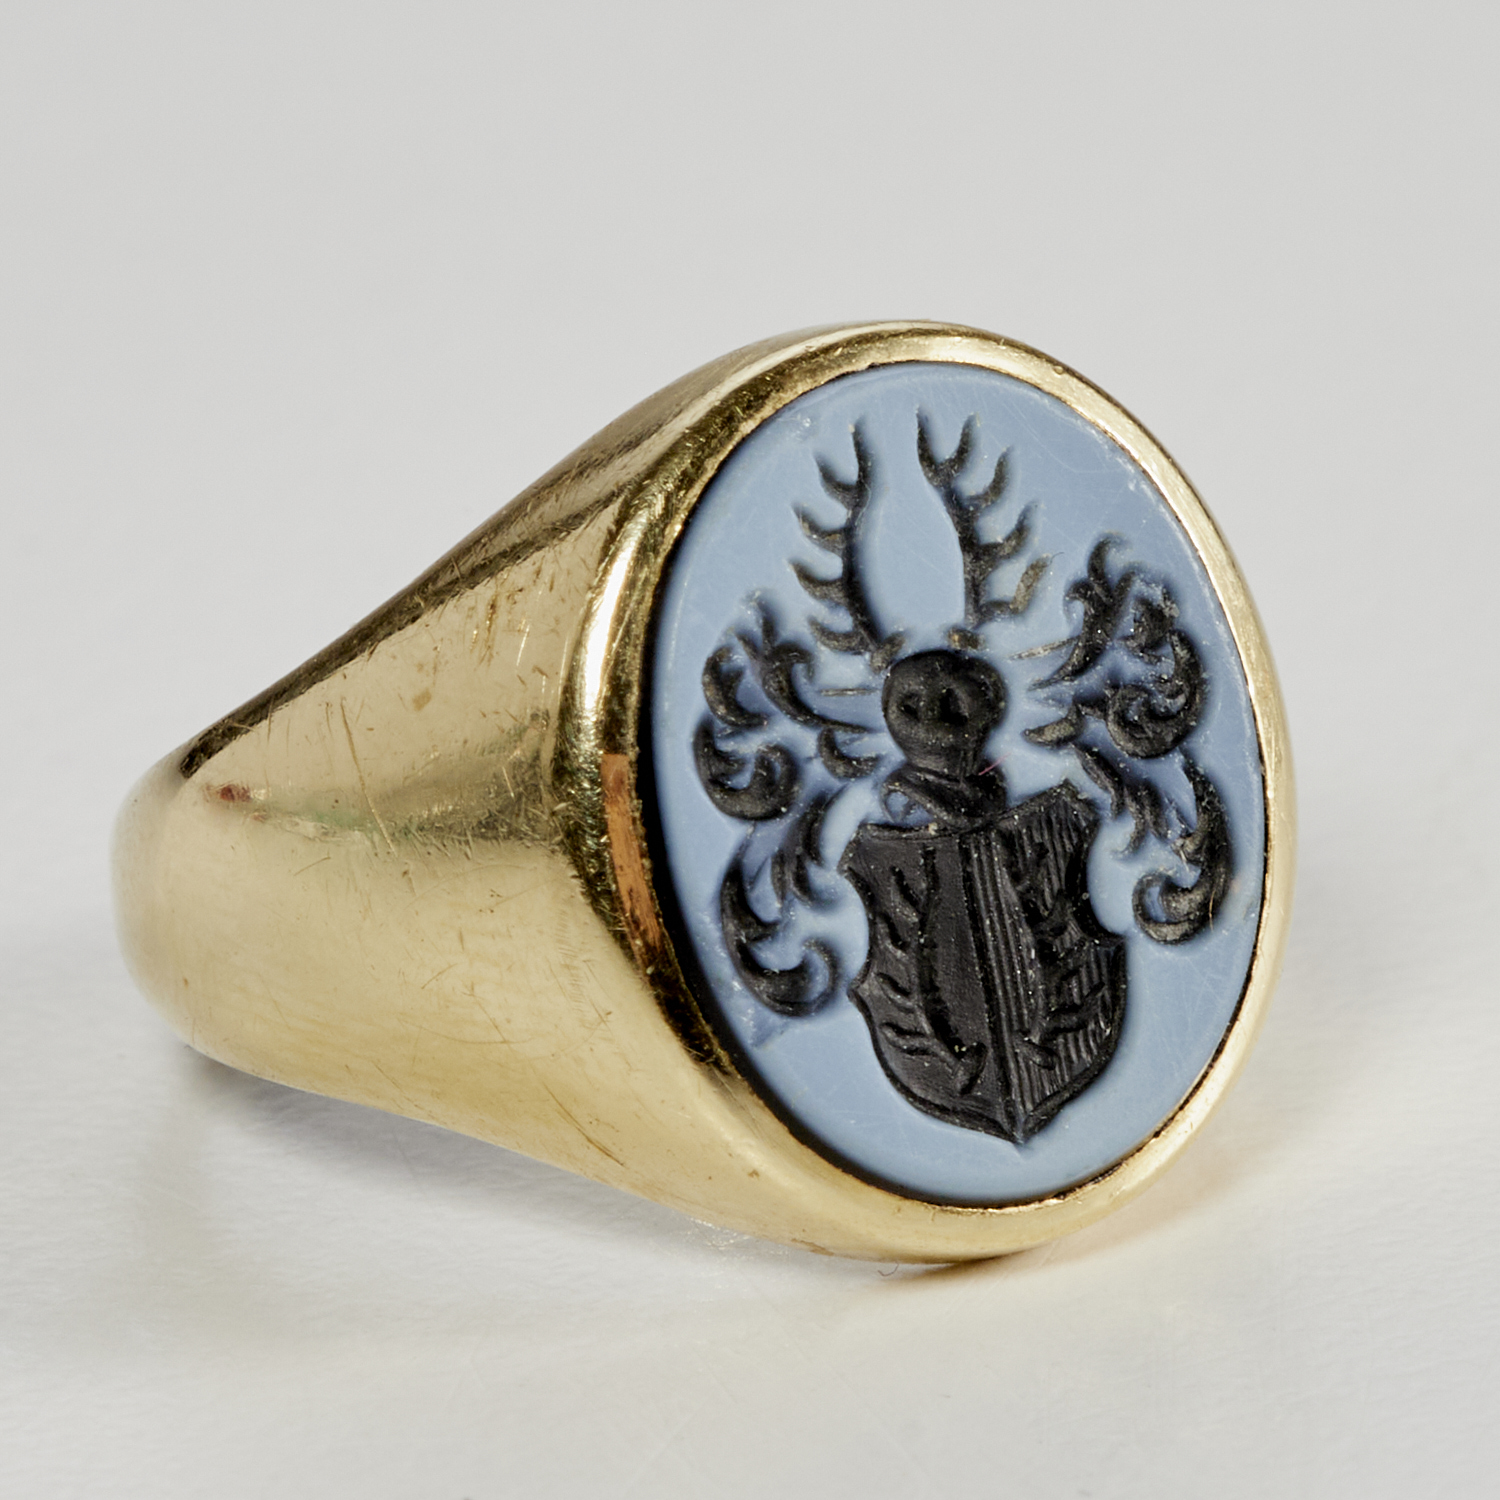 14K GOLD SIGNET RING WITH CREST 2fae00